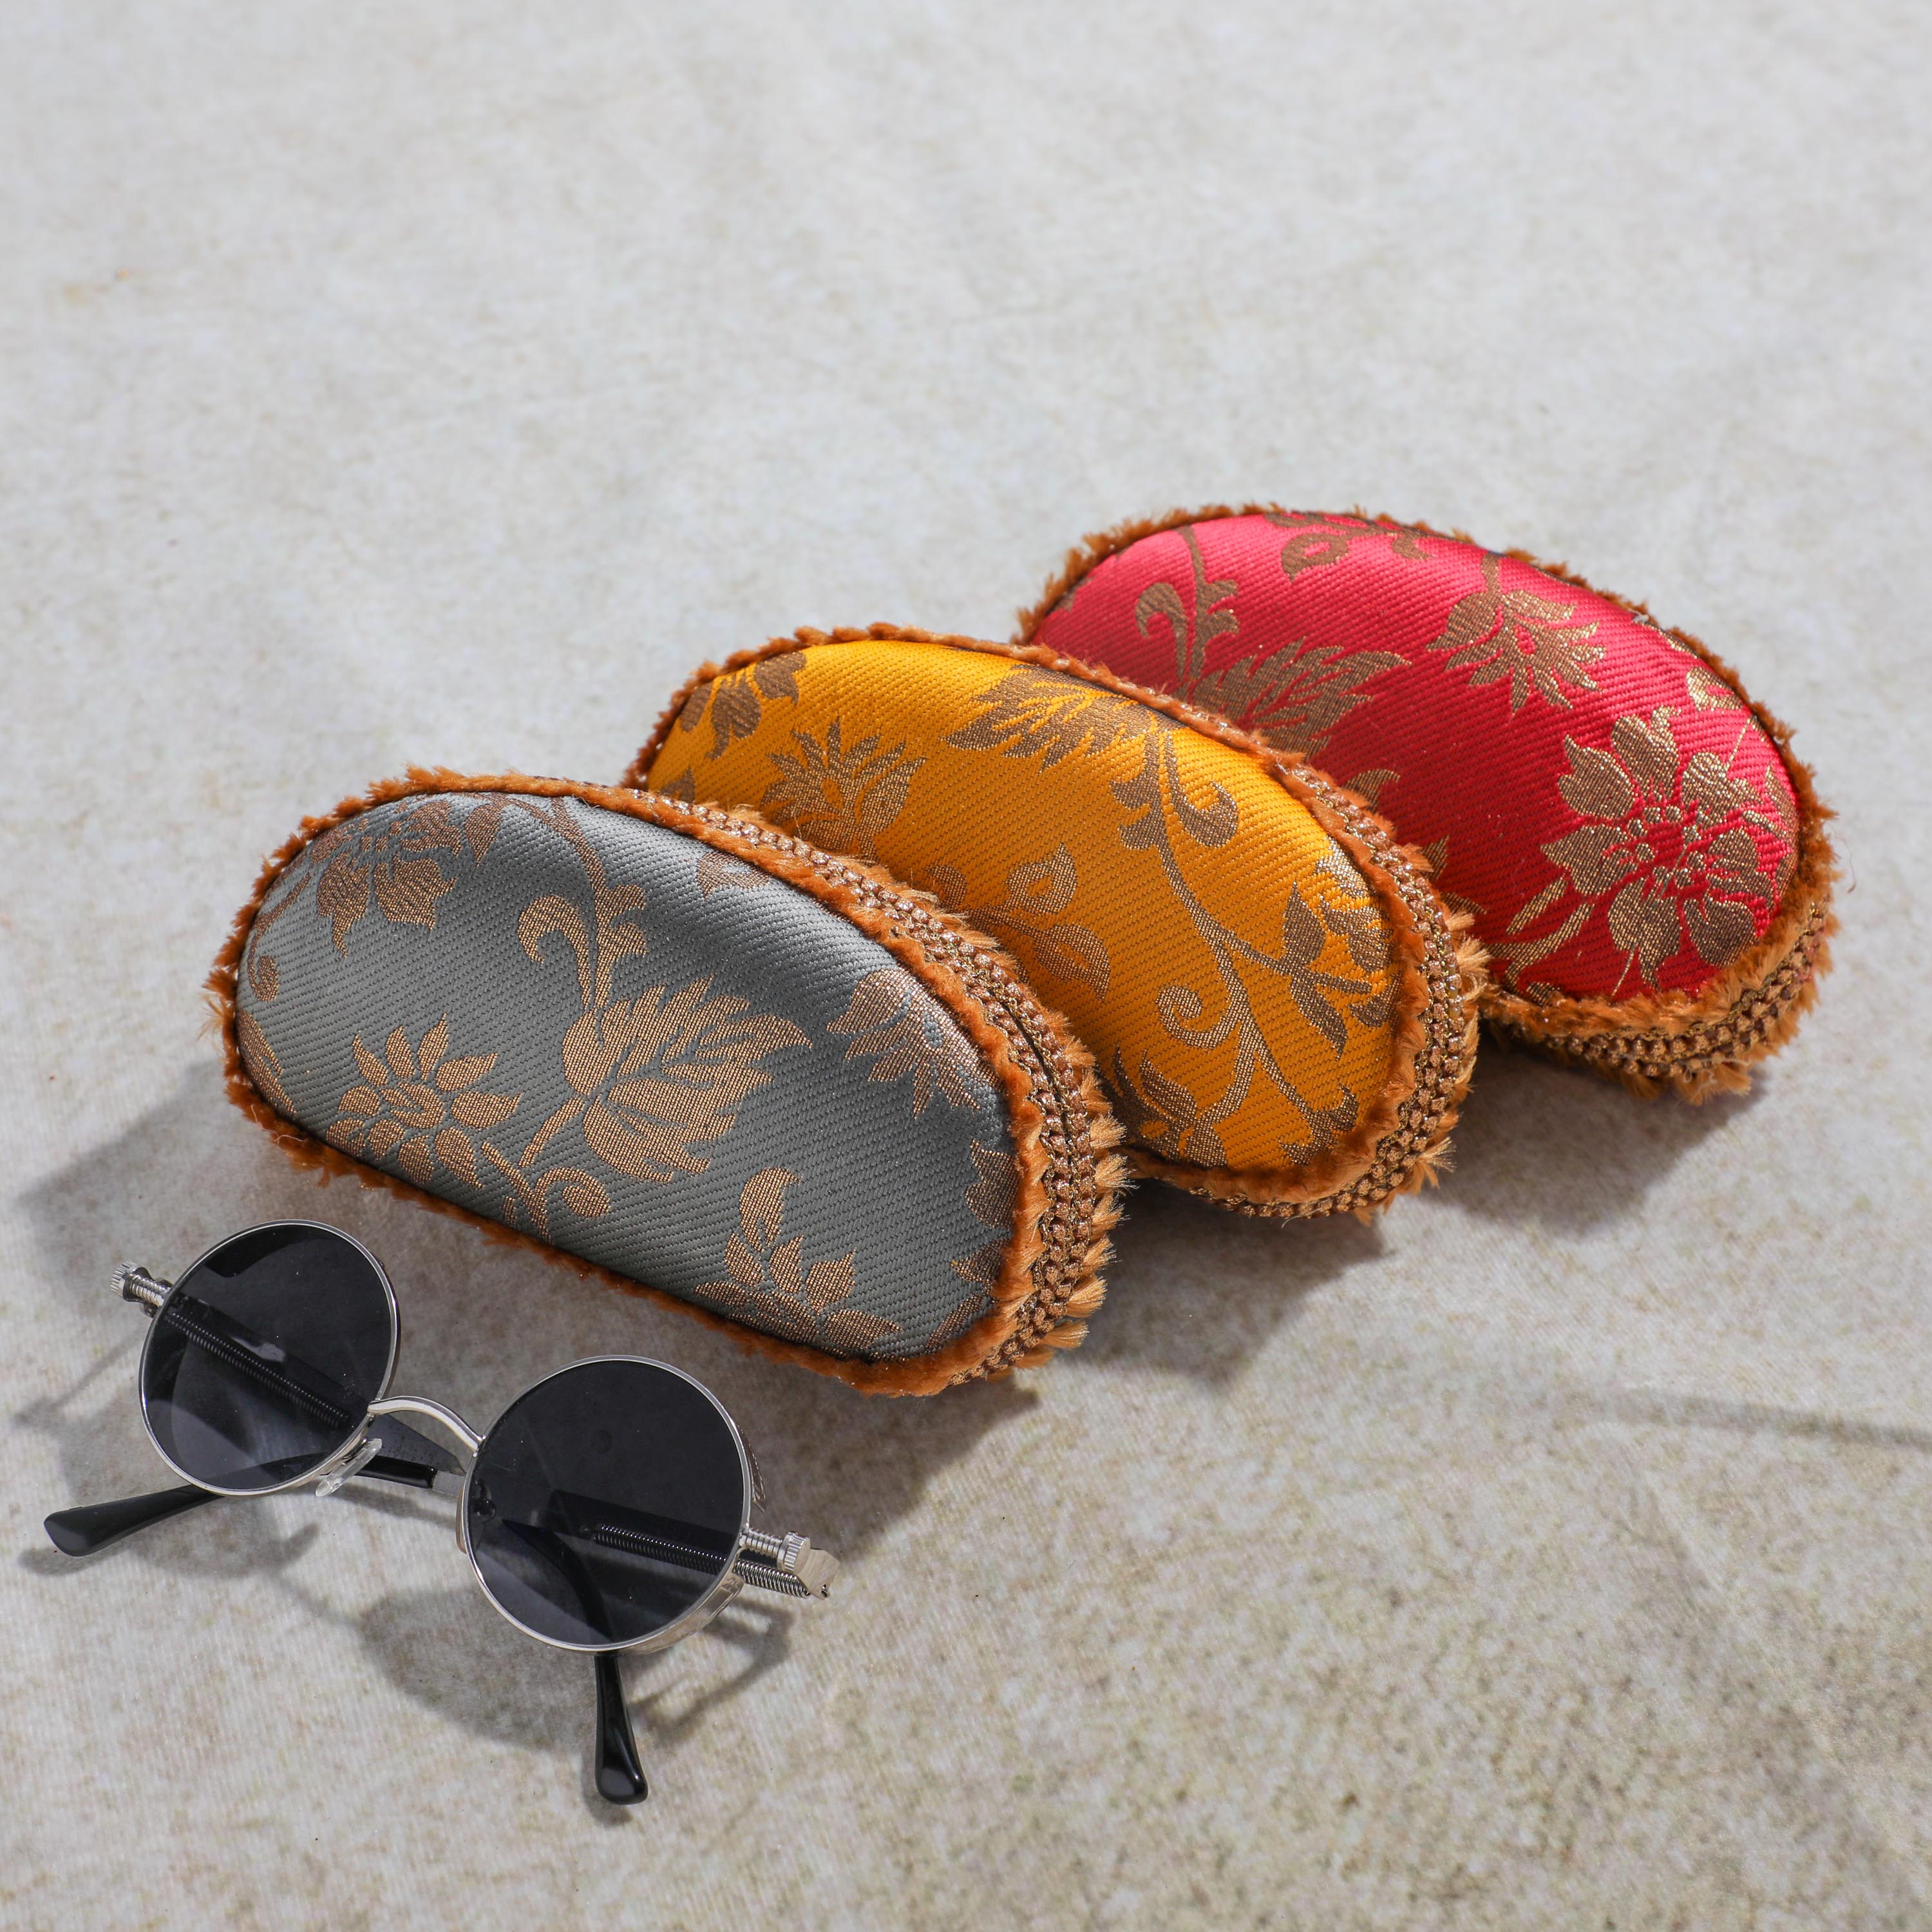 Fabric Sunglass Case for gifting in the USA